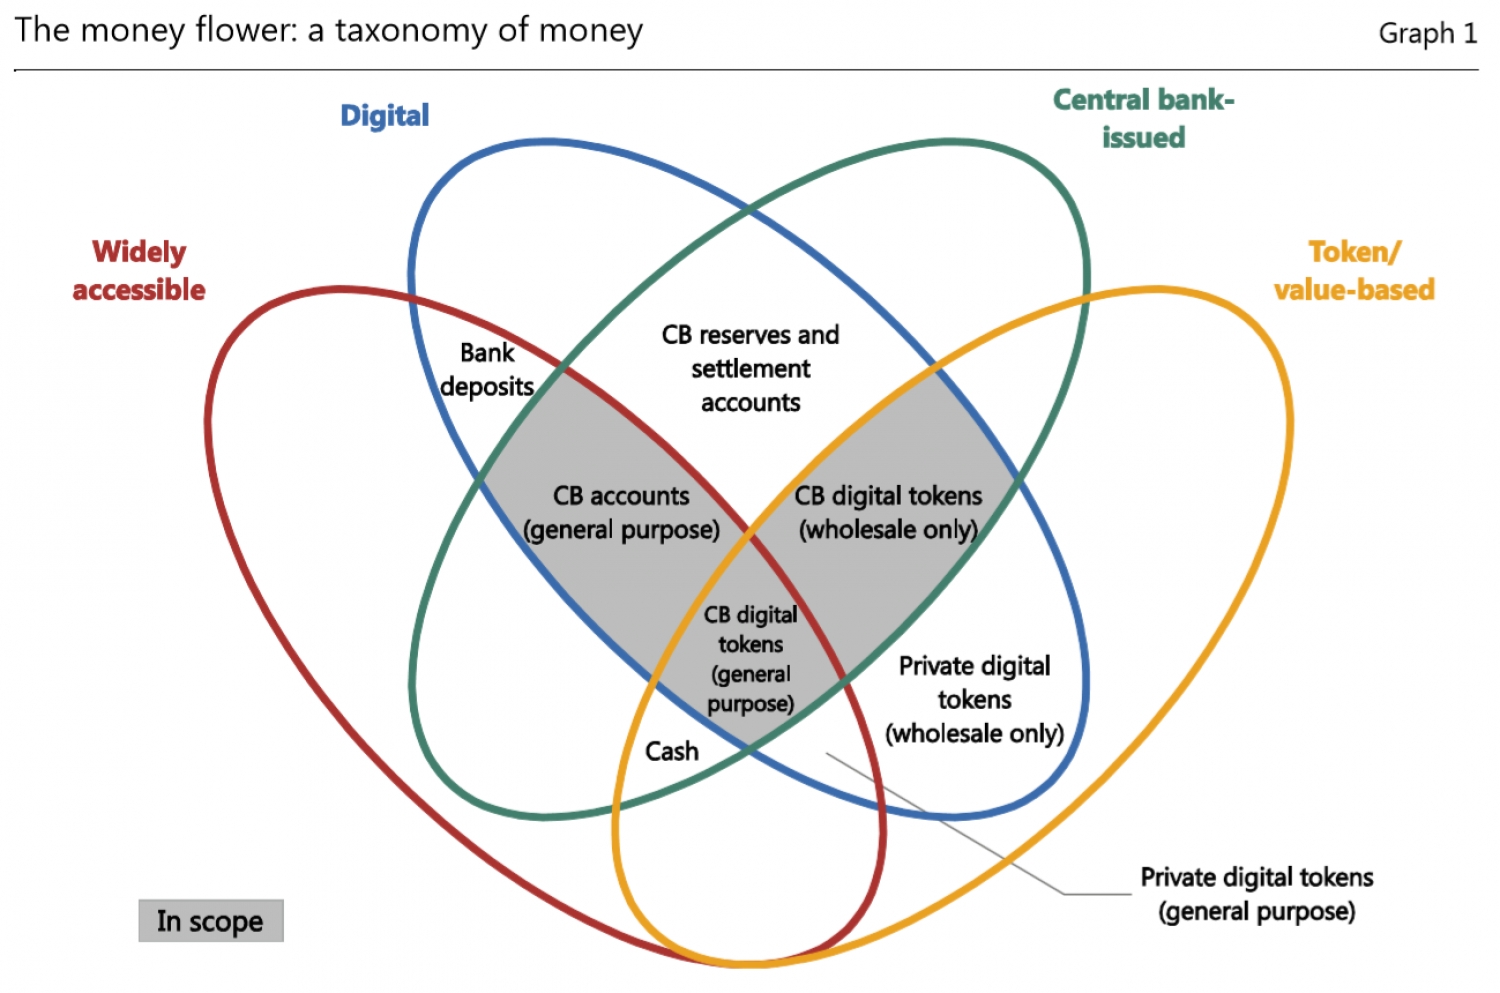 PROCEEDING WITH CAUTION - A SURVEY ON CENTRAL BANK DIGITAL CURRENCY: BIS